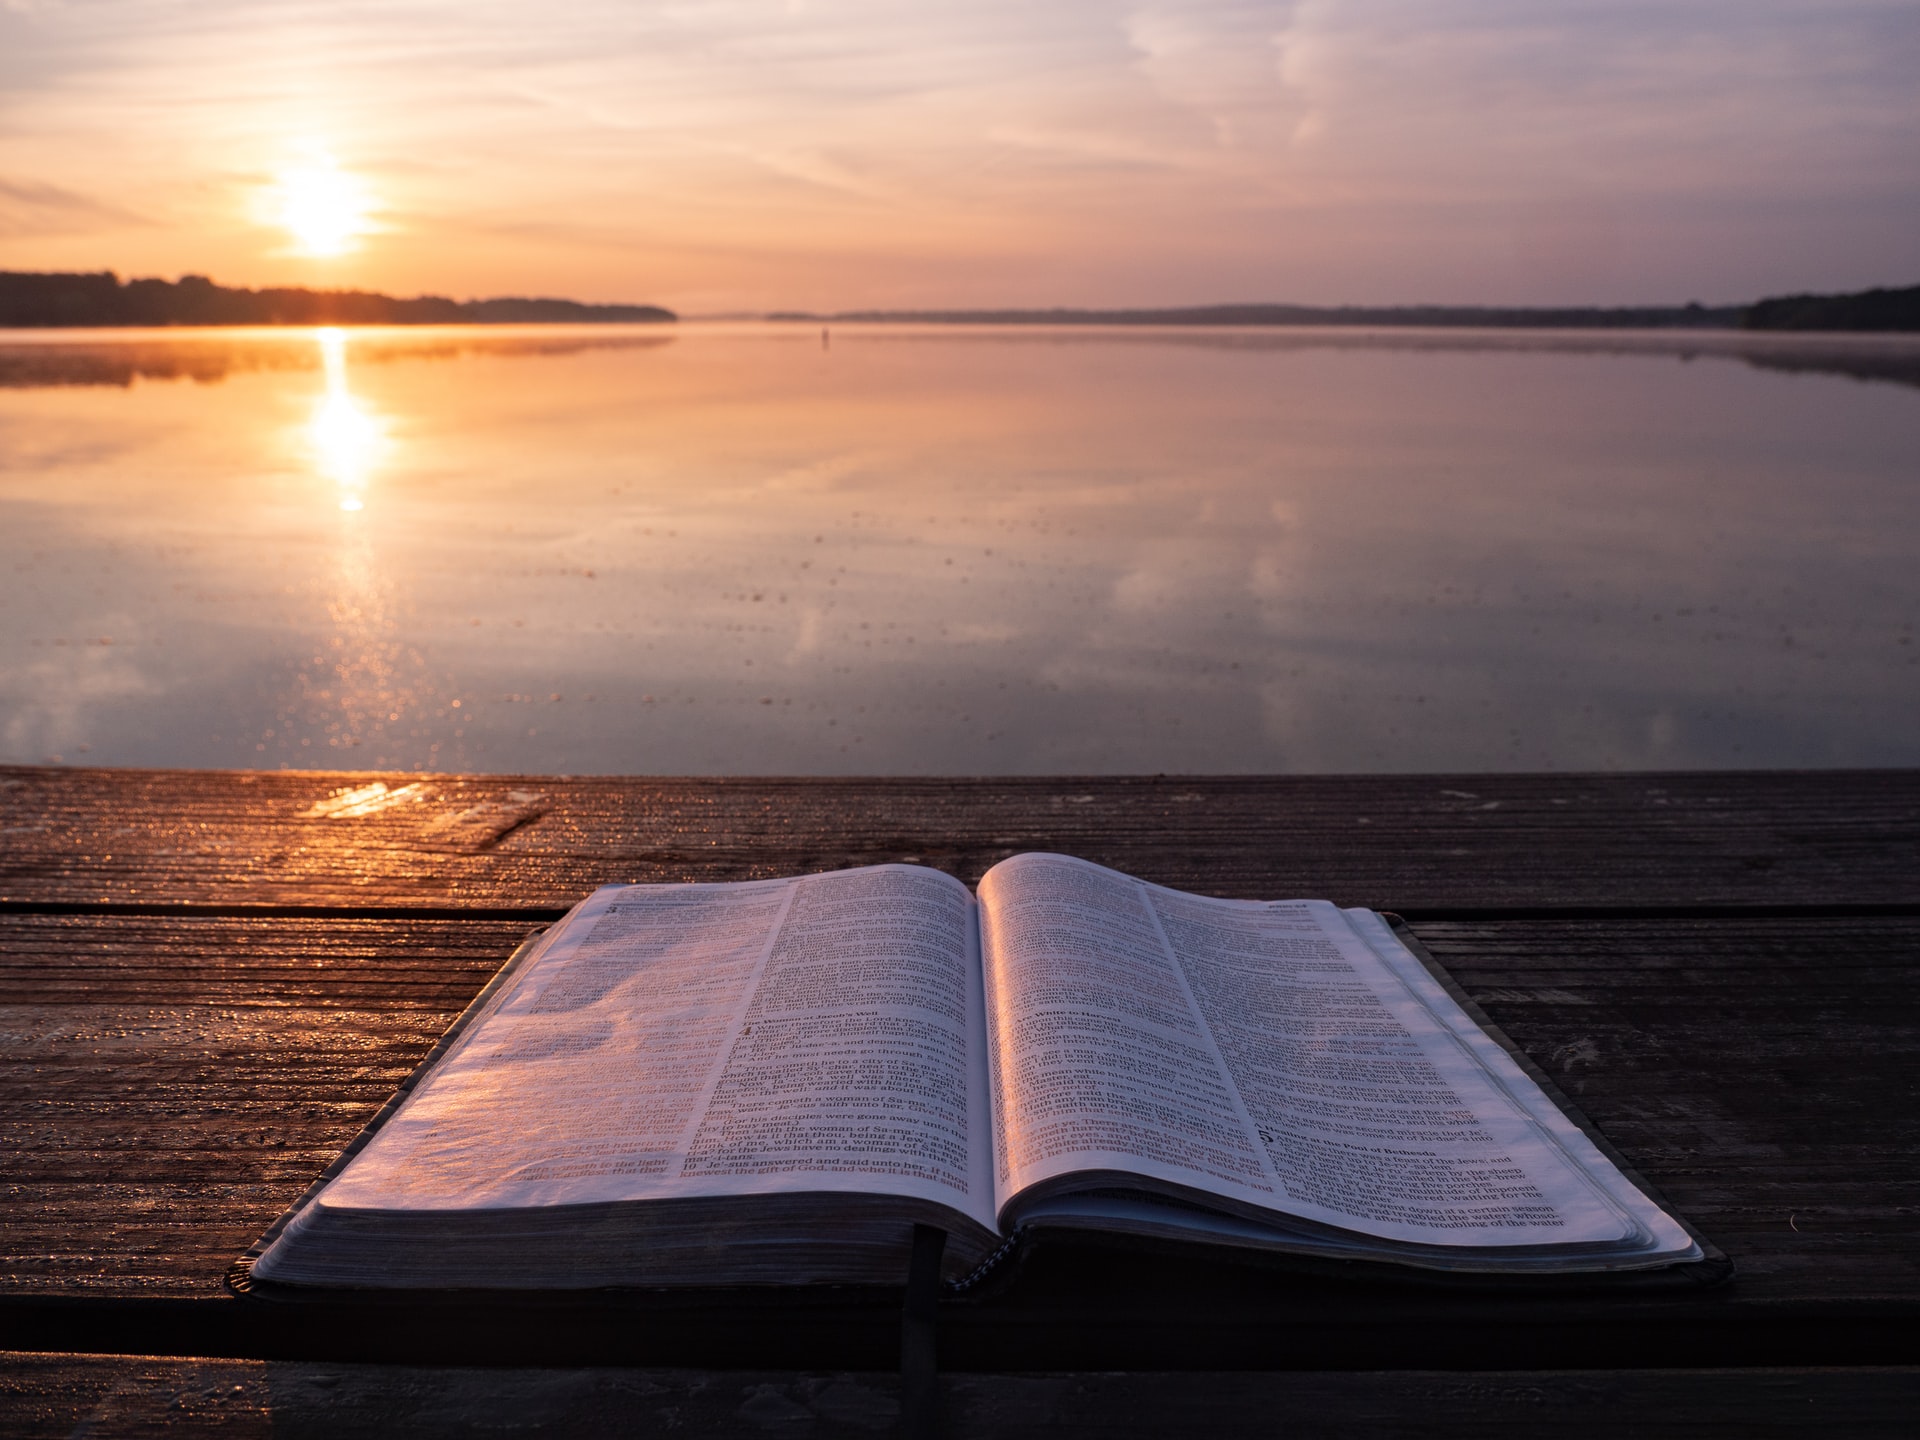 bible on dock overlooking the water and sunset